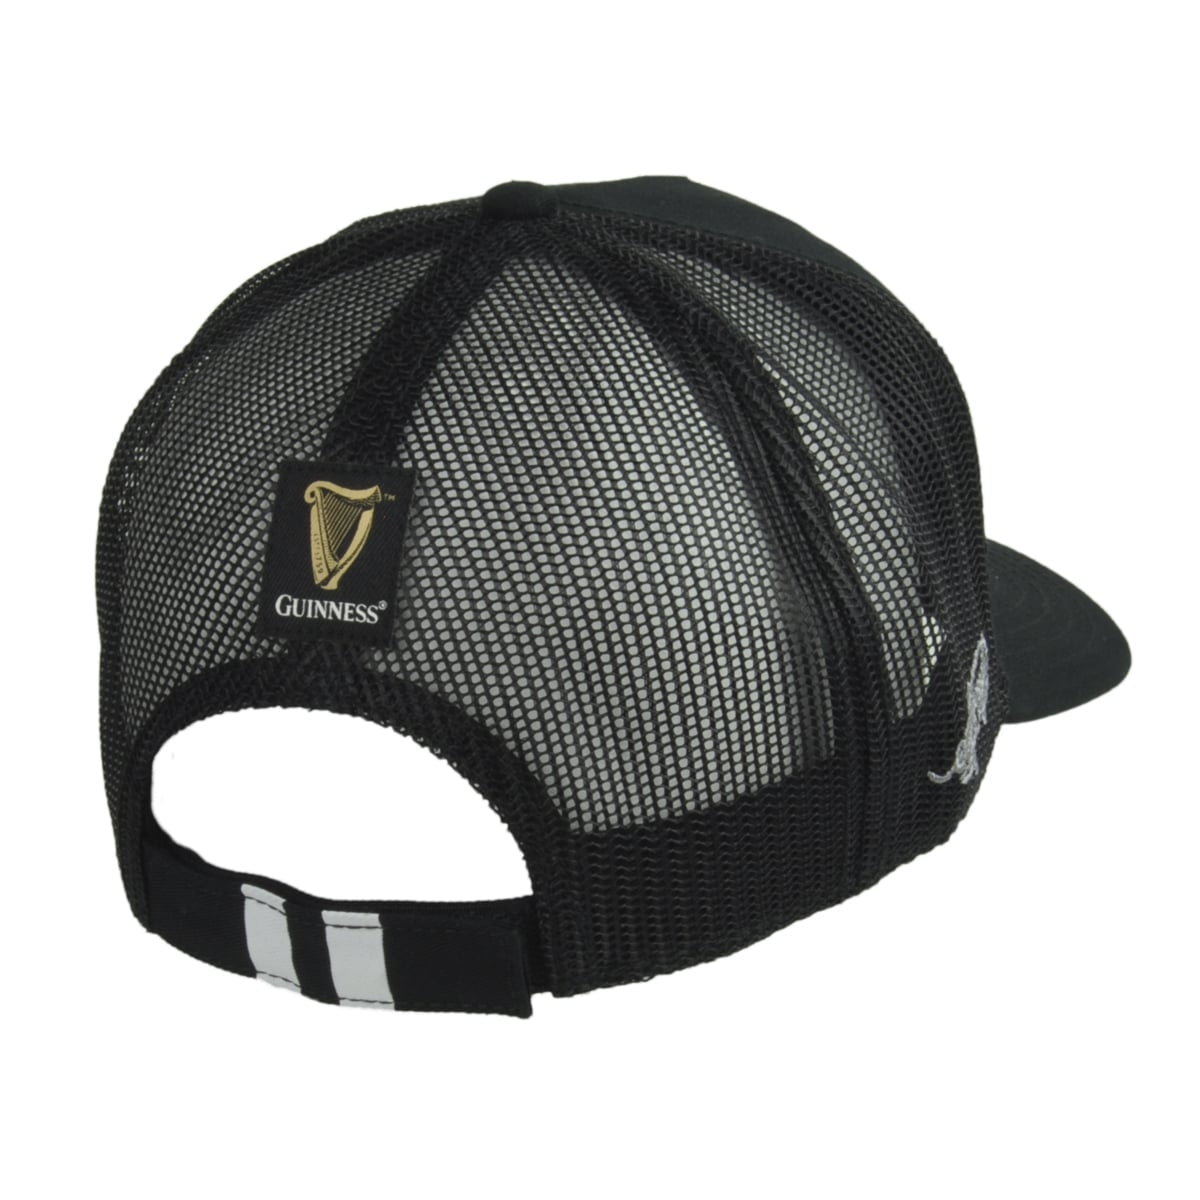 An adjustable Guinness Premium Black & White Harp cap with a Guinness UK logo on it.